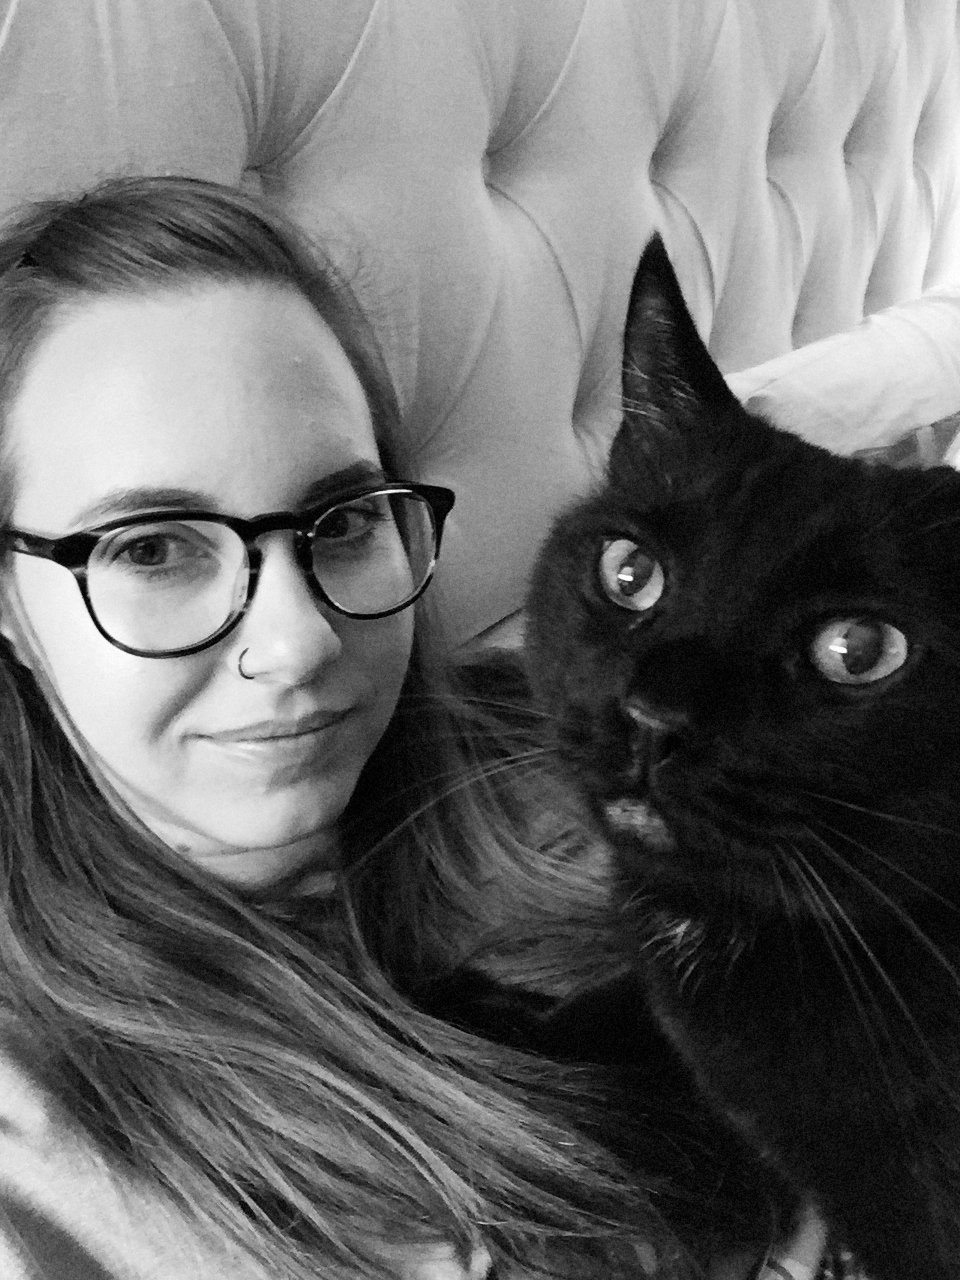 A girl poses with her black cat both looking at camera